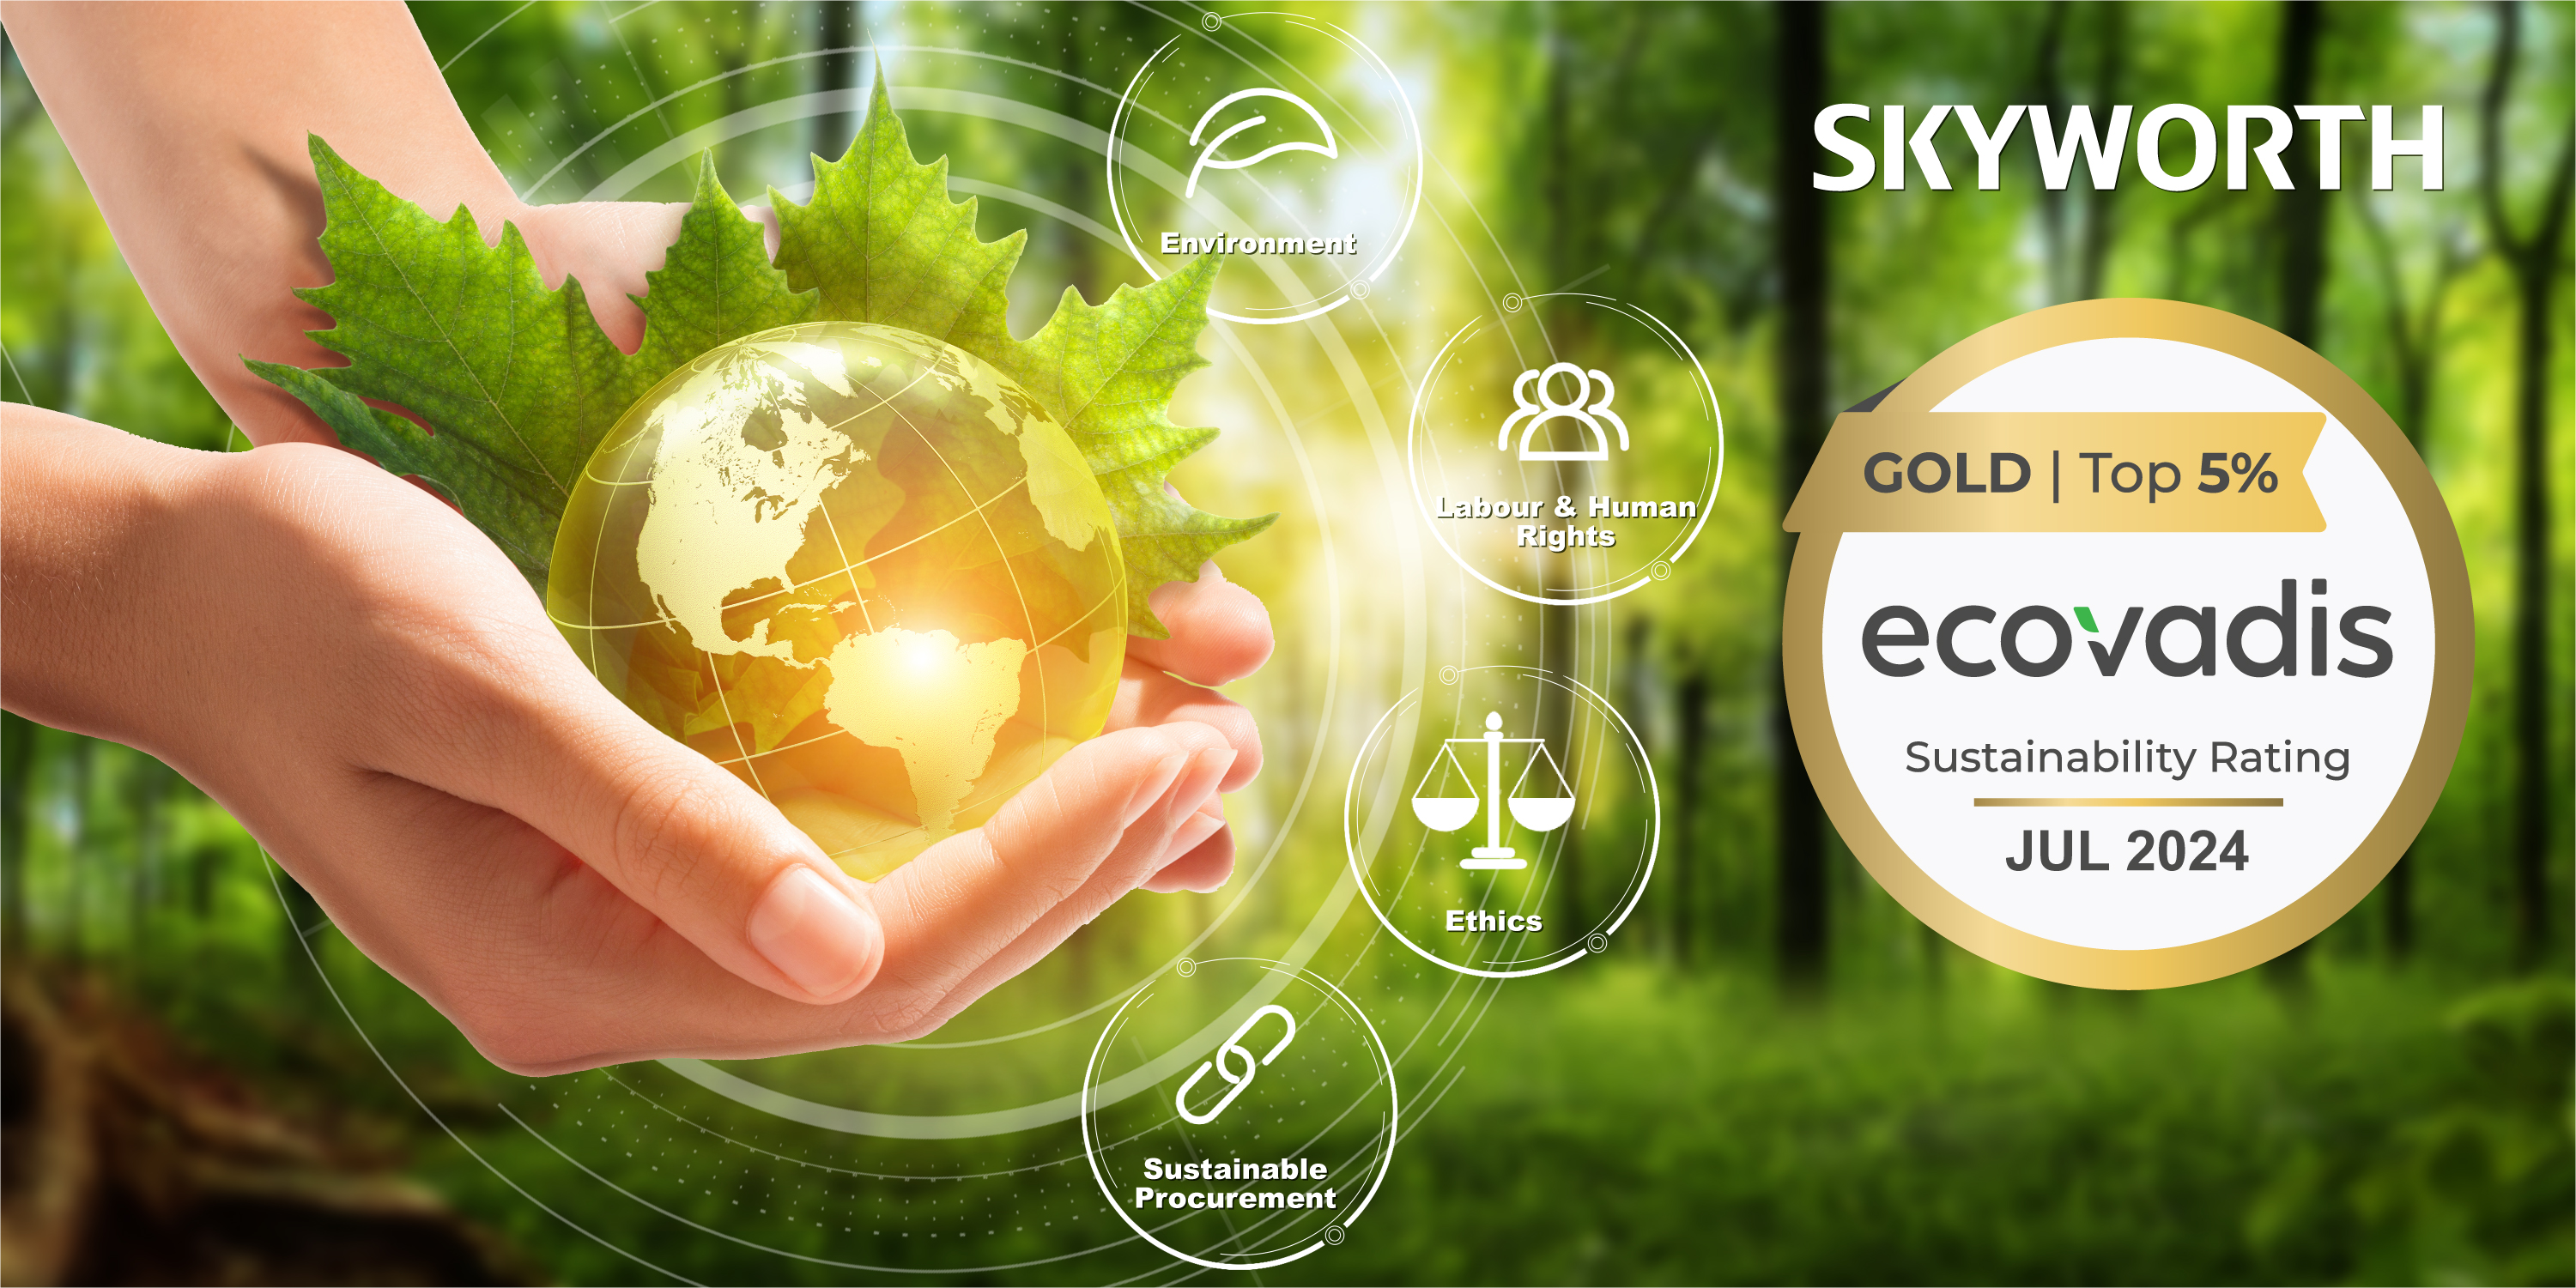 Skyworth Achieves Gold: Leading The Way For A Greener, More Sustainable Industry